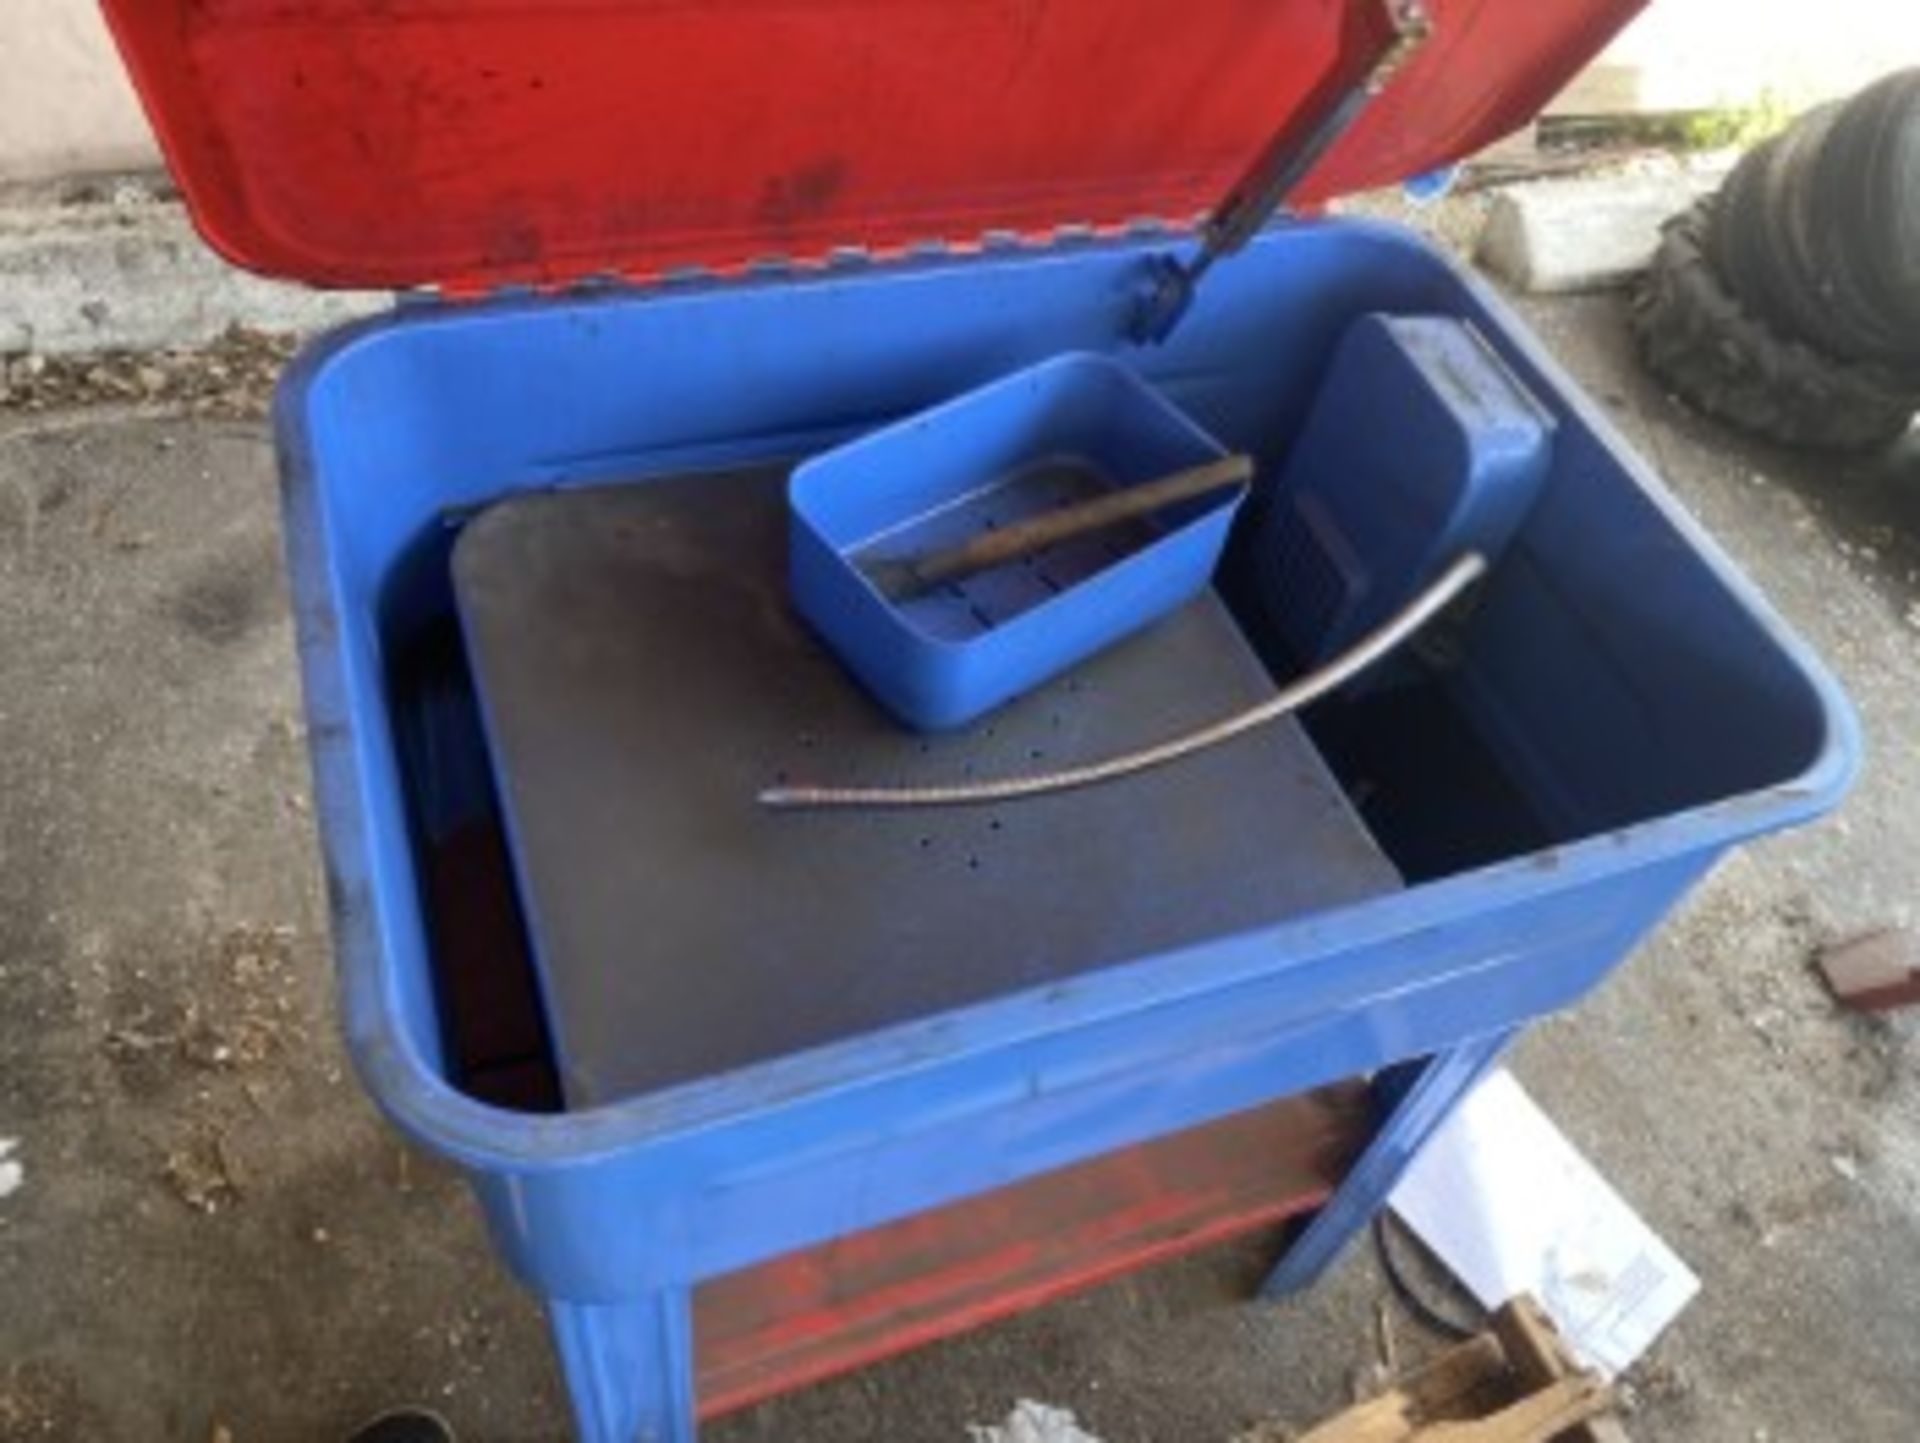 CHICAGO BLUE / RED PARTS WASHER - 20 GALLON - Image 3 of 5